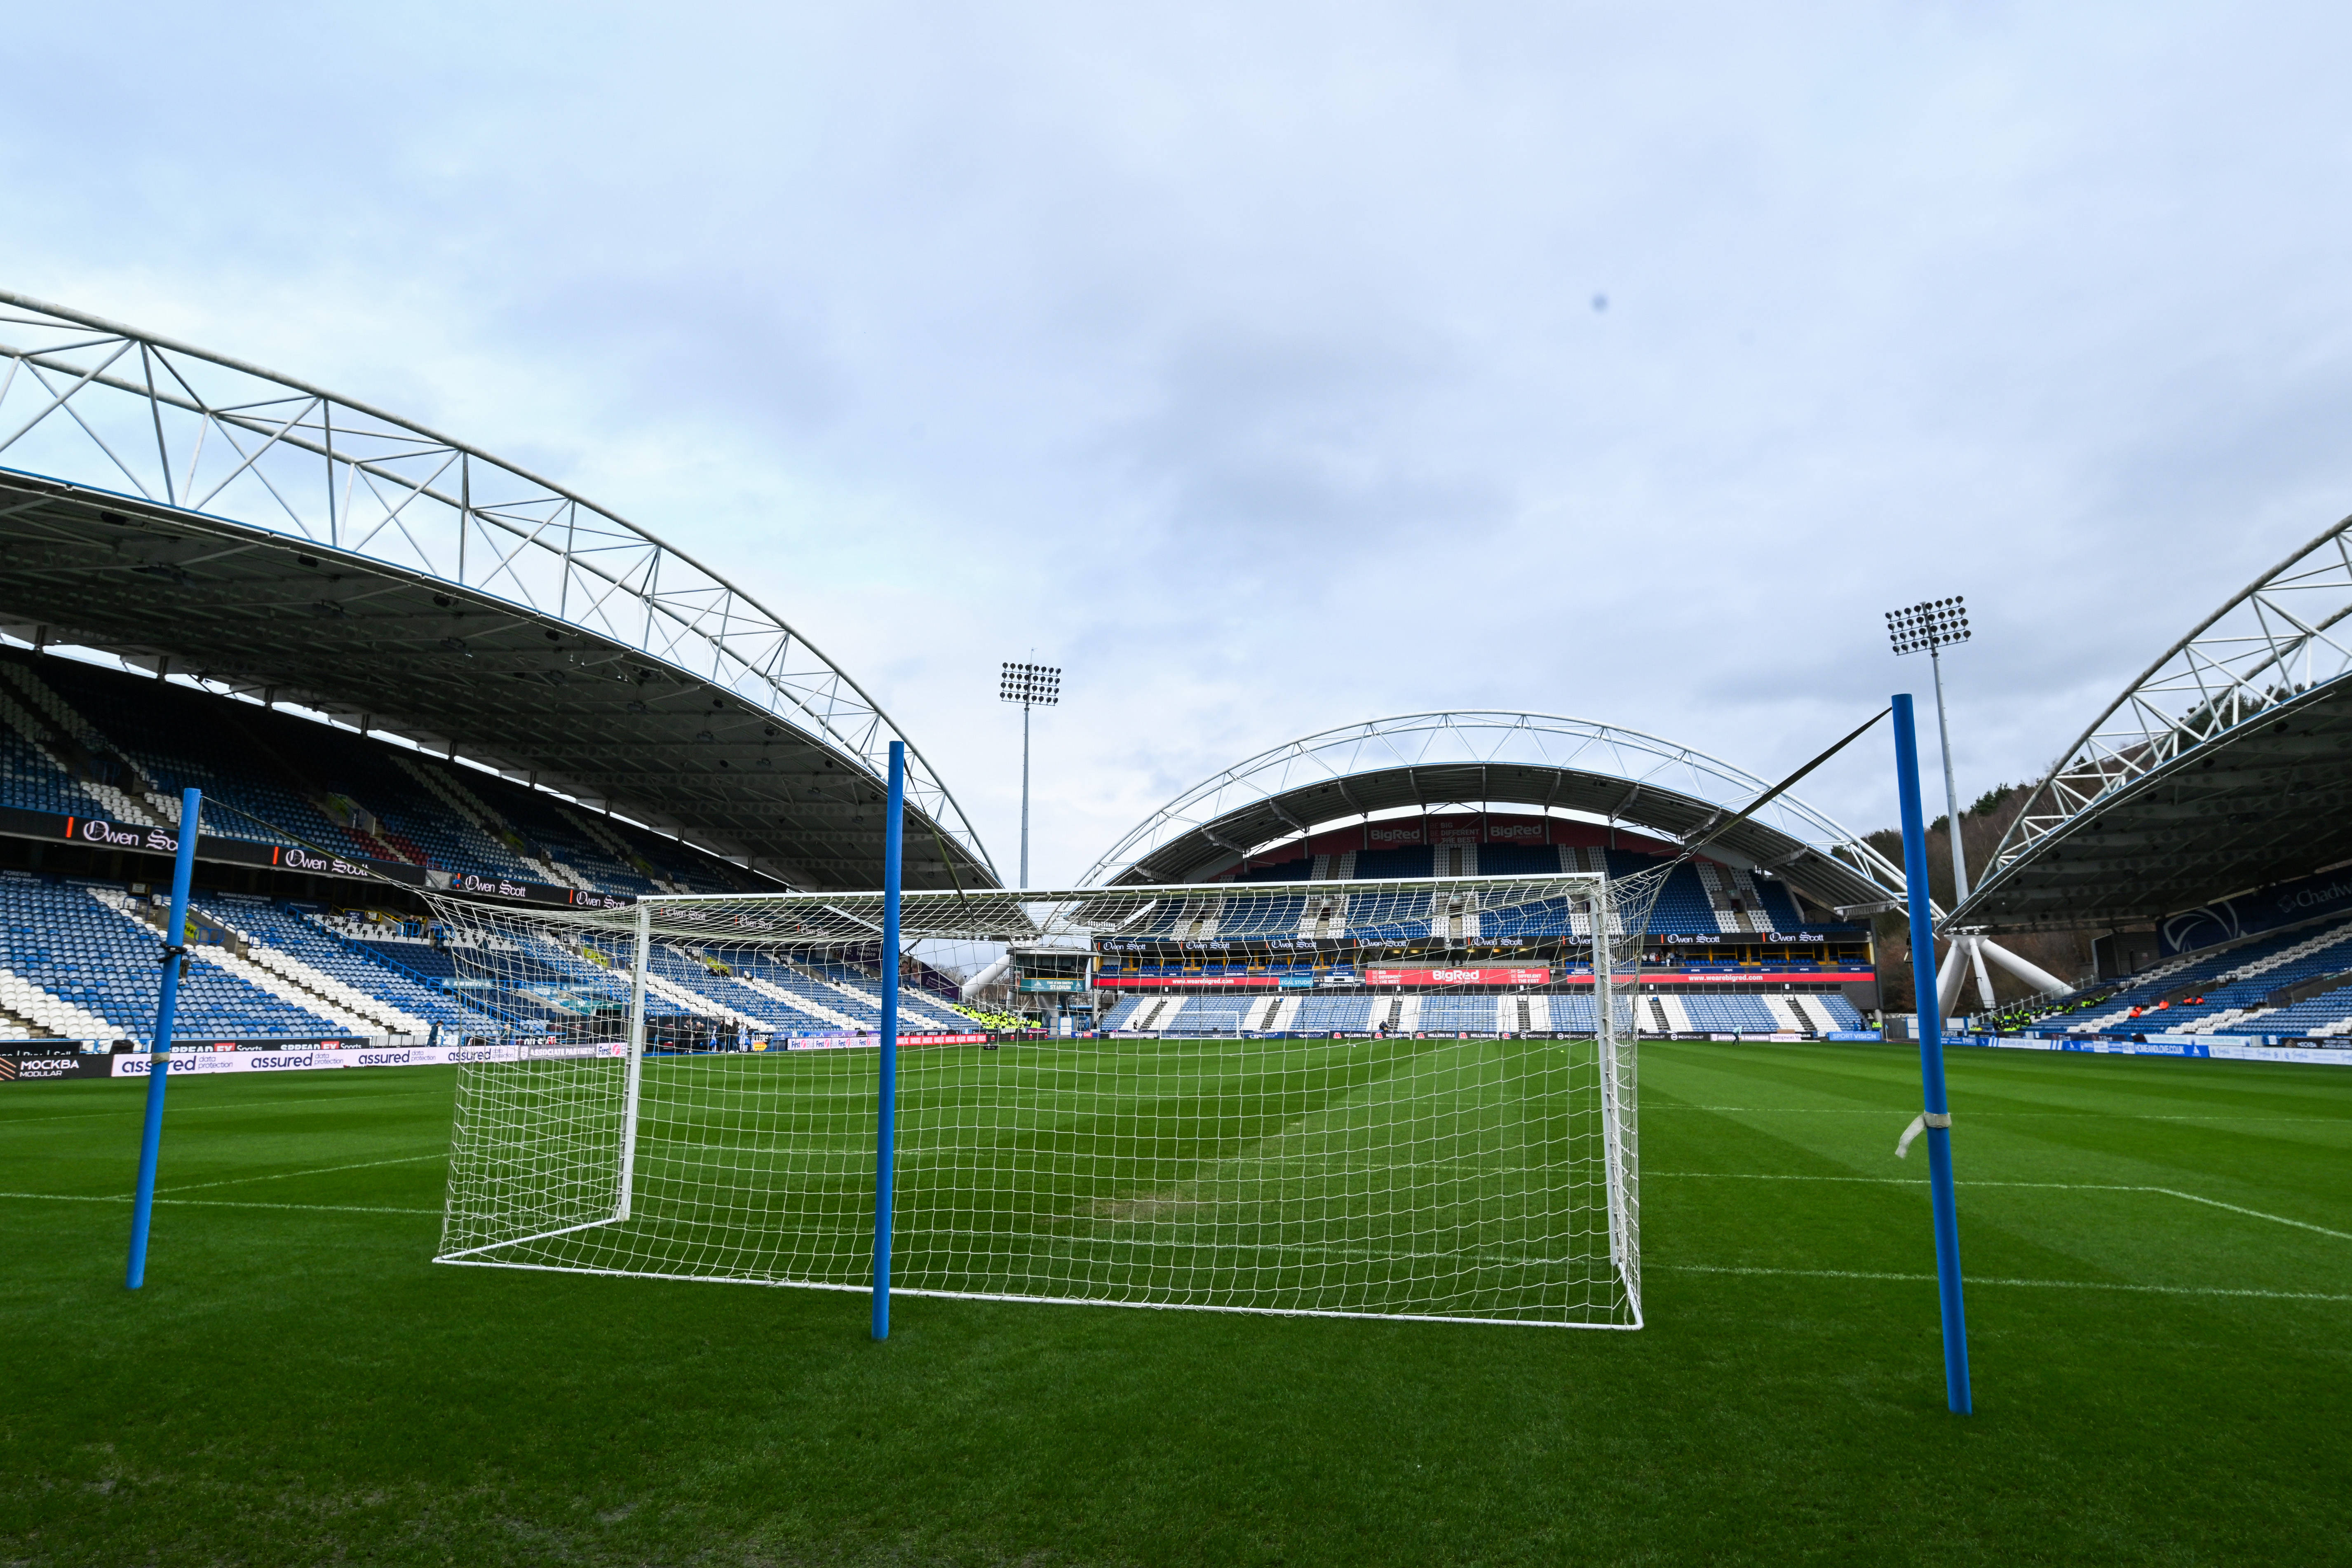 A general view of the John Smith's Stadium from behind the goal